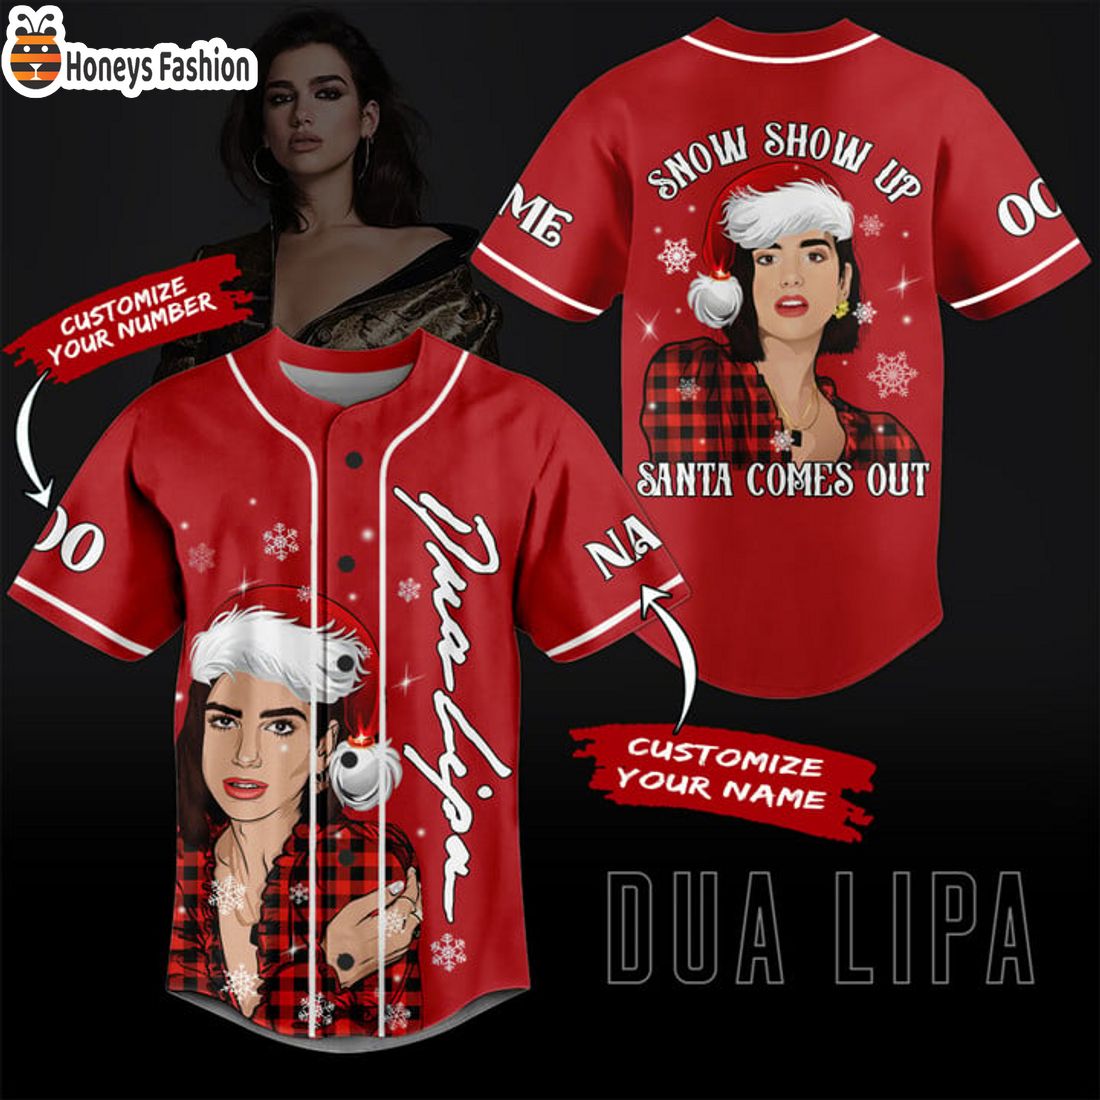 SELLER Dua Lipa Snow Show Up Santa Comes Out Personalized Name Number Baseball Jersey